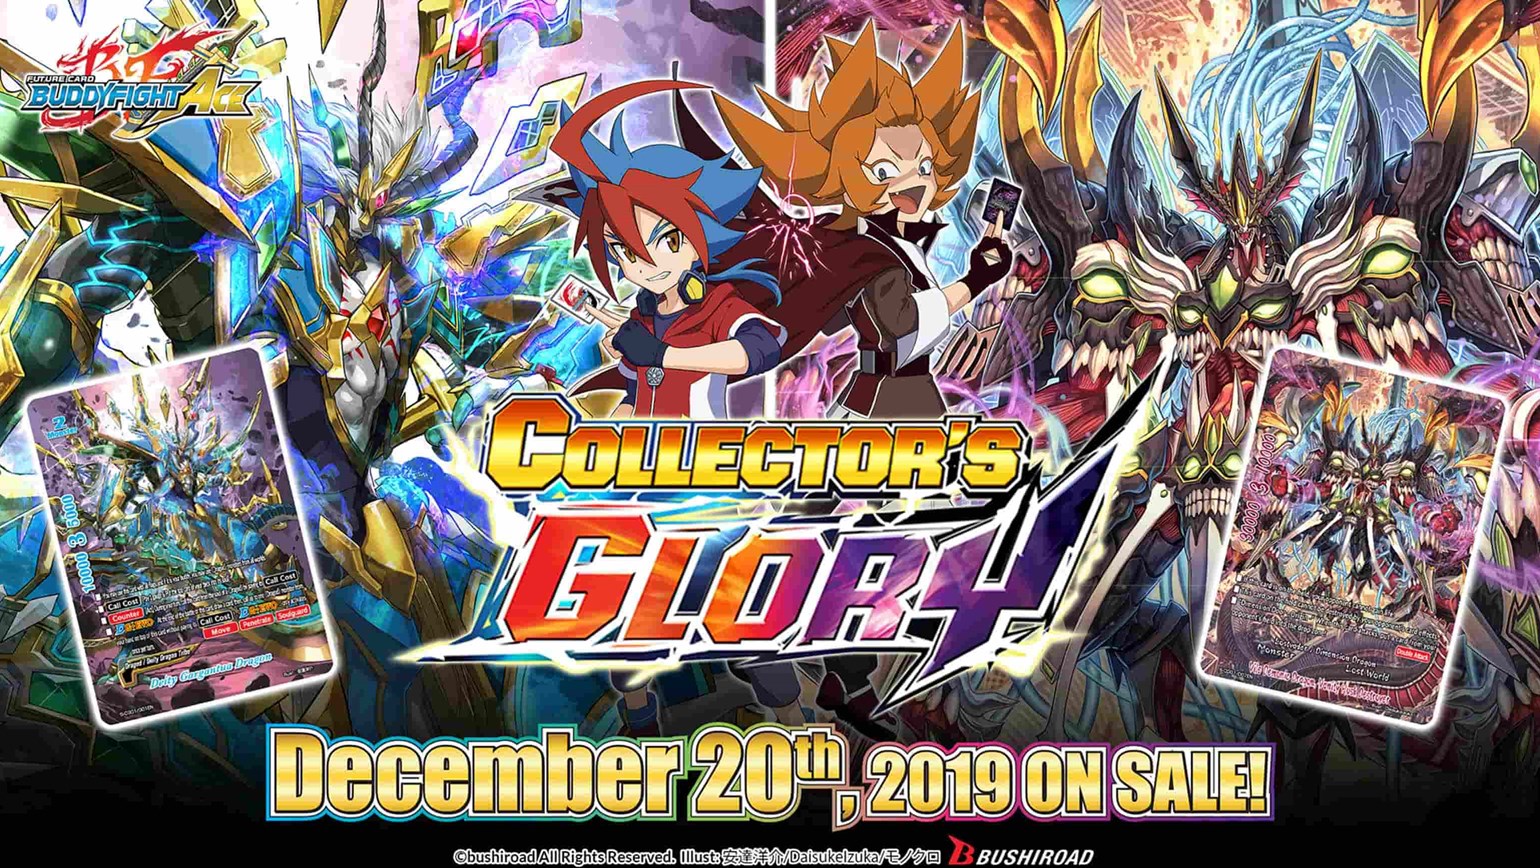 Future Card Buddyfight Ace Collector's Glory Coming December 20th